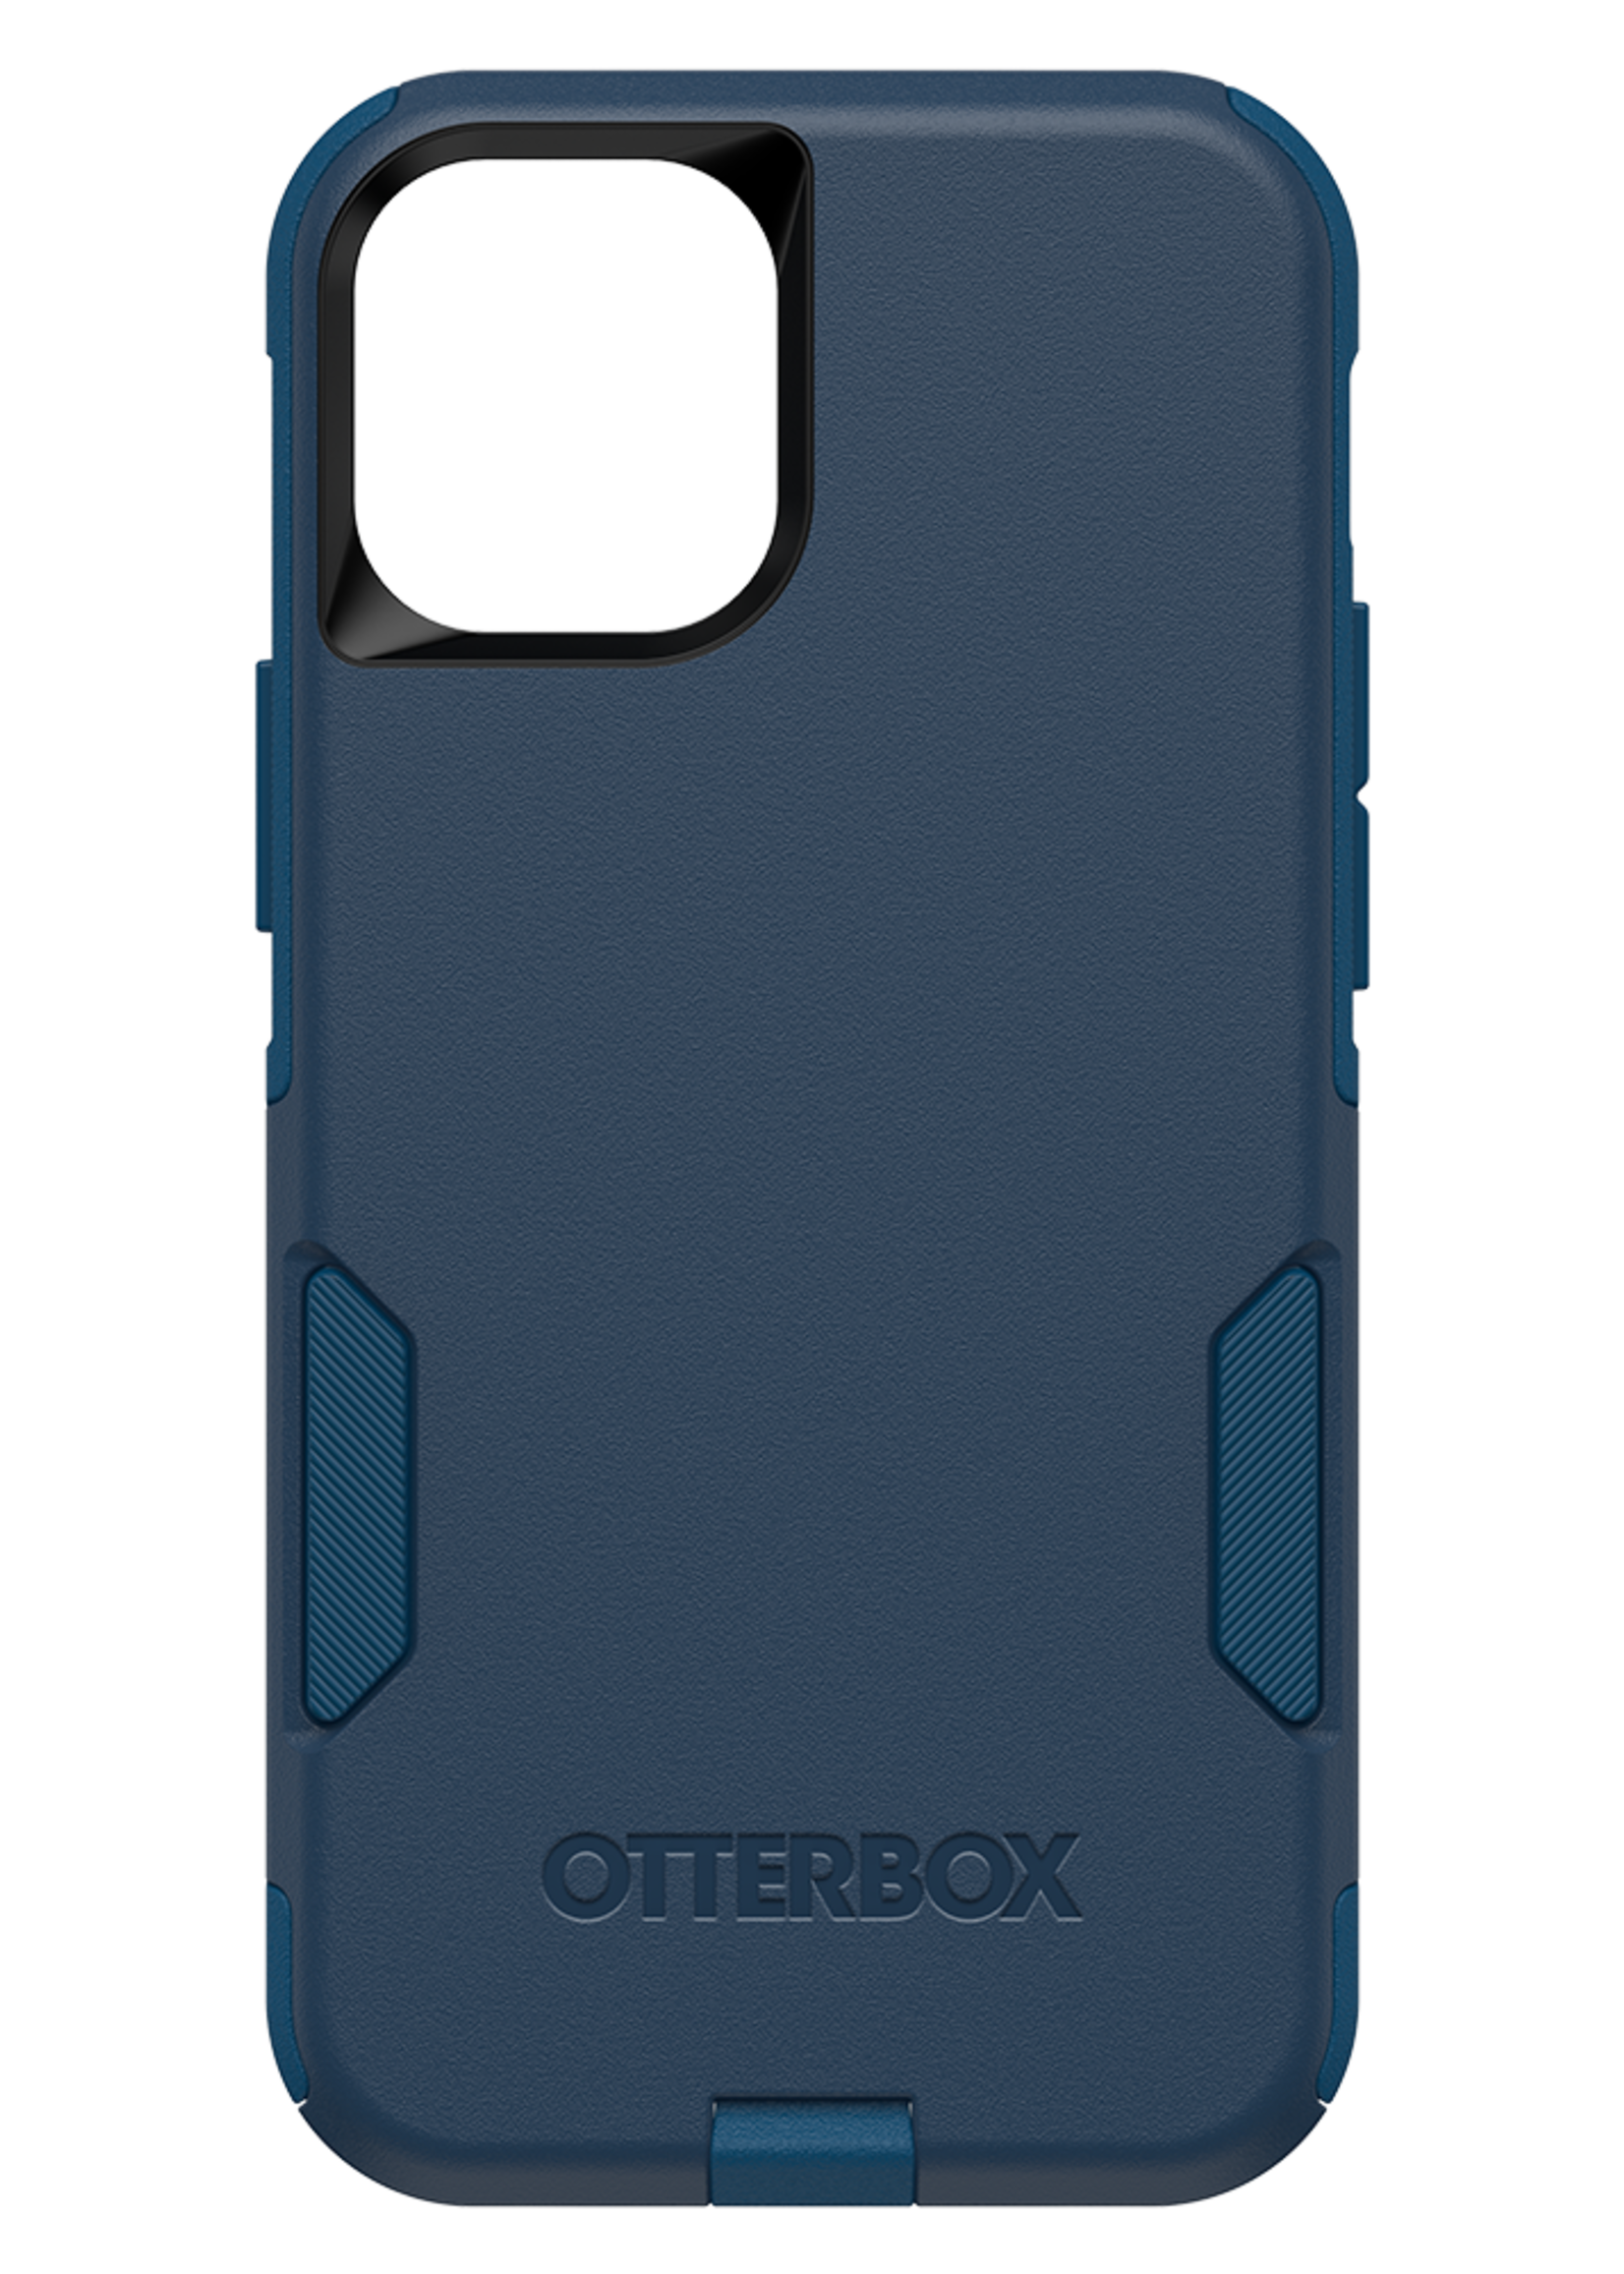 Otterbox OtterBox - Commuter Antimicrobial Case for Apple iPhone 12 mini - Bespoke Way